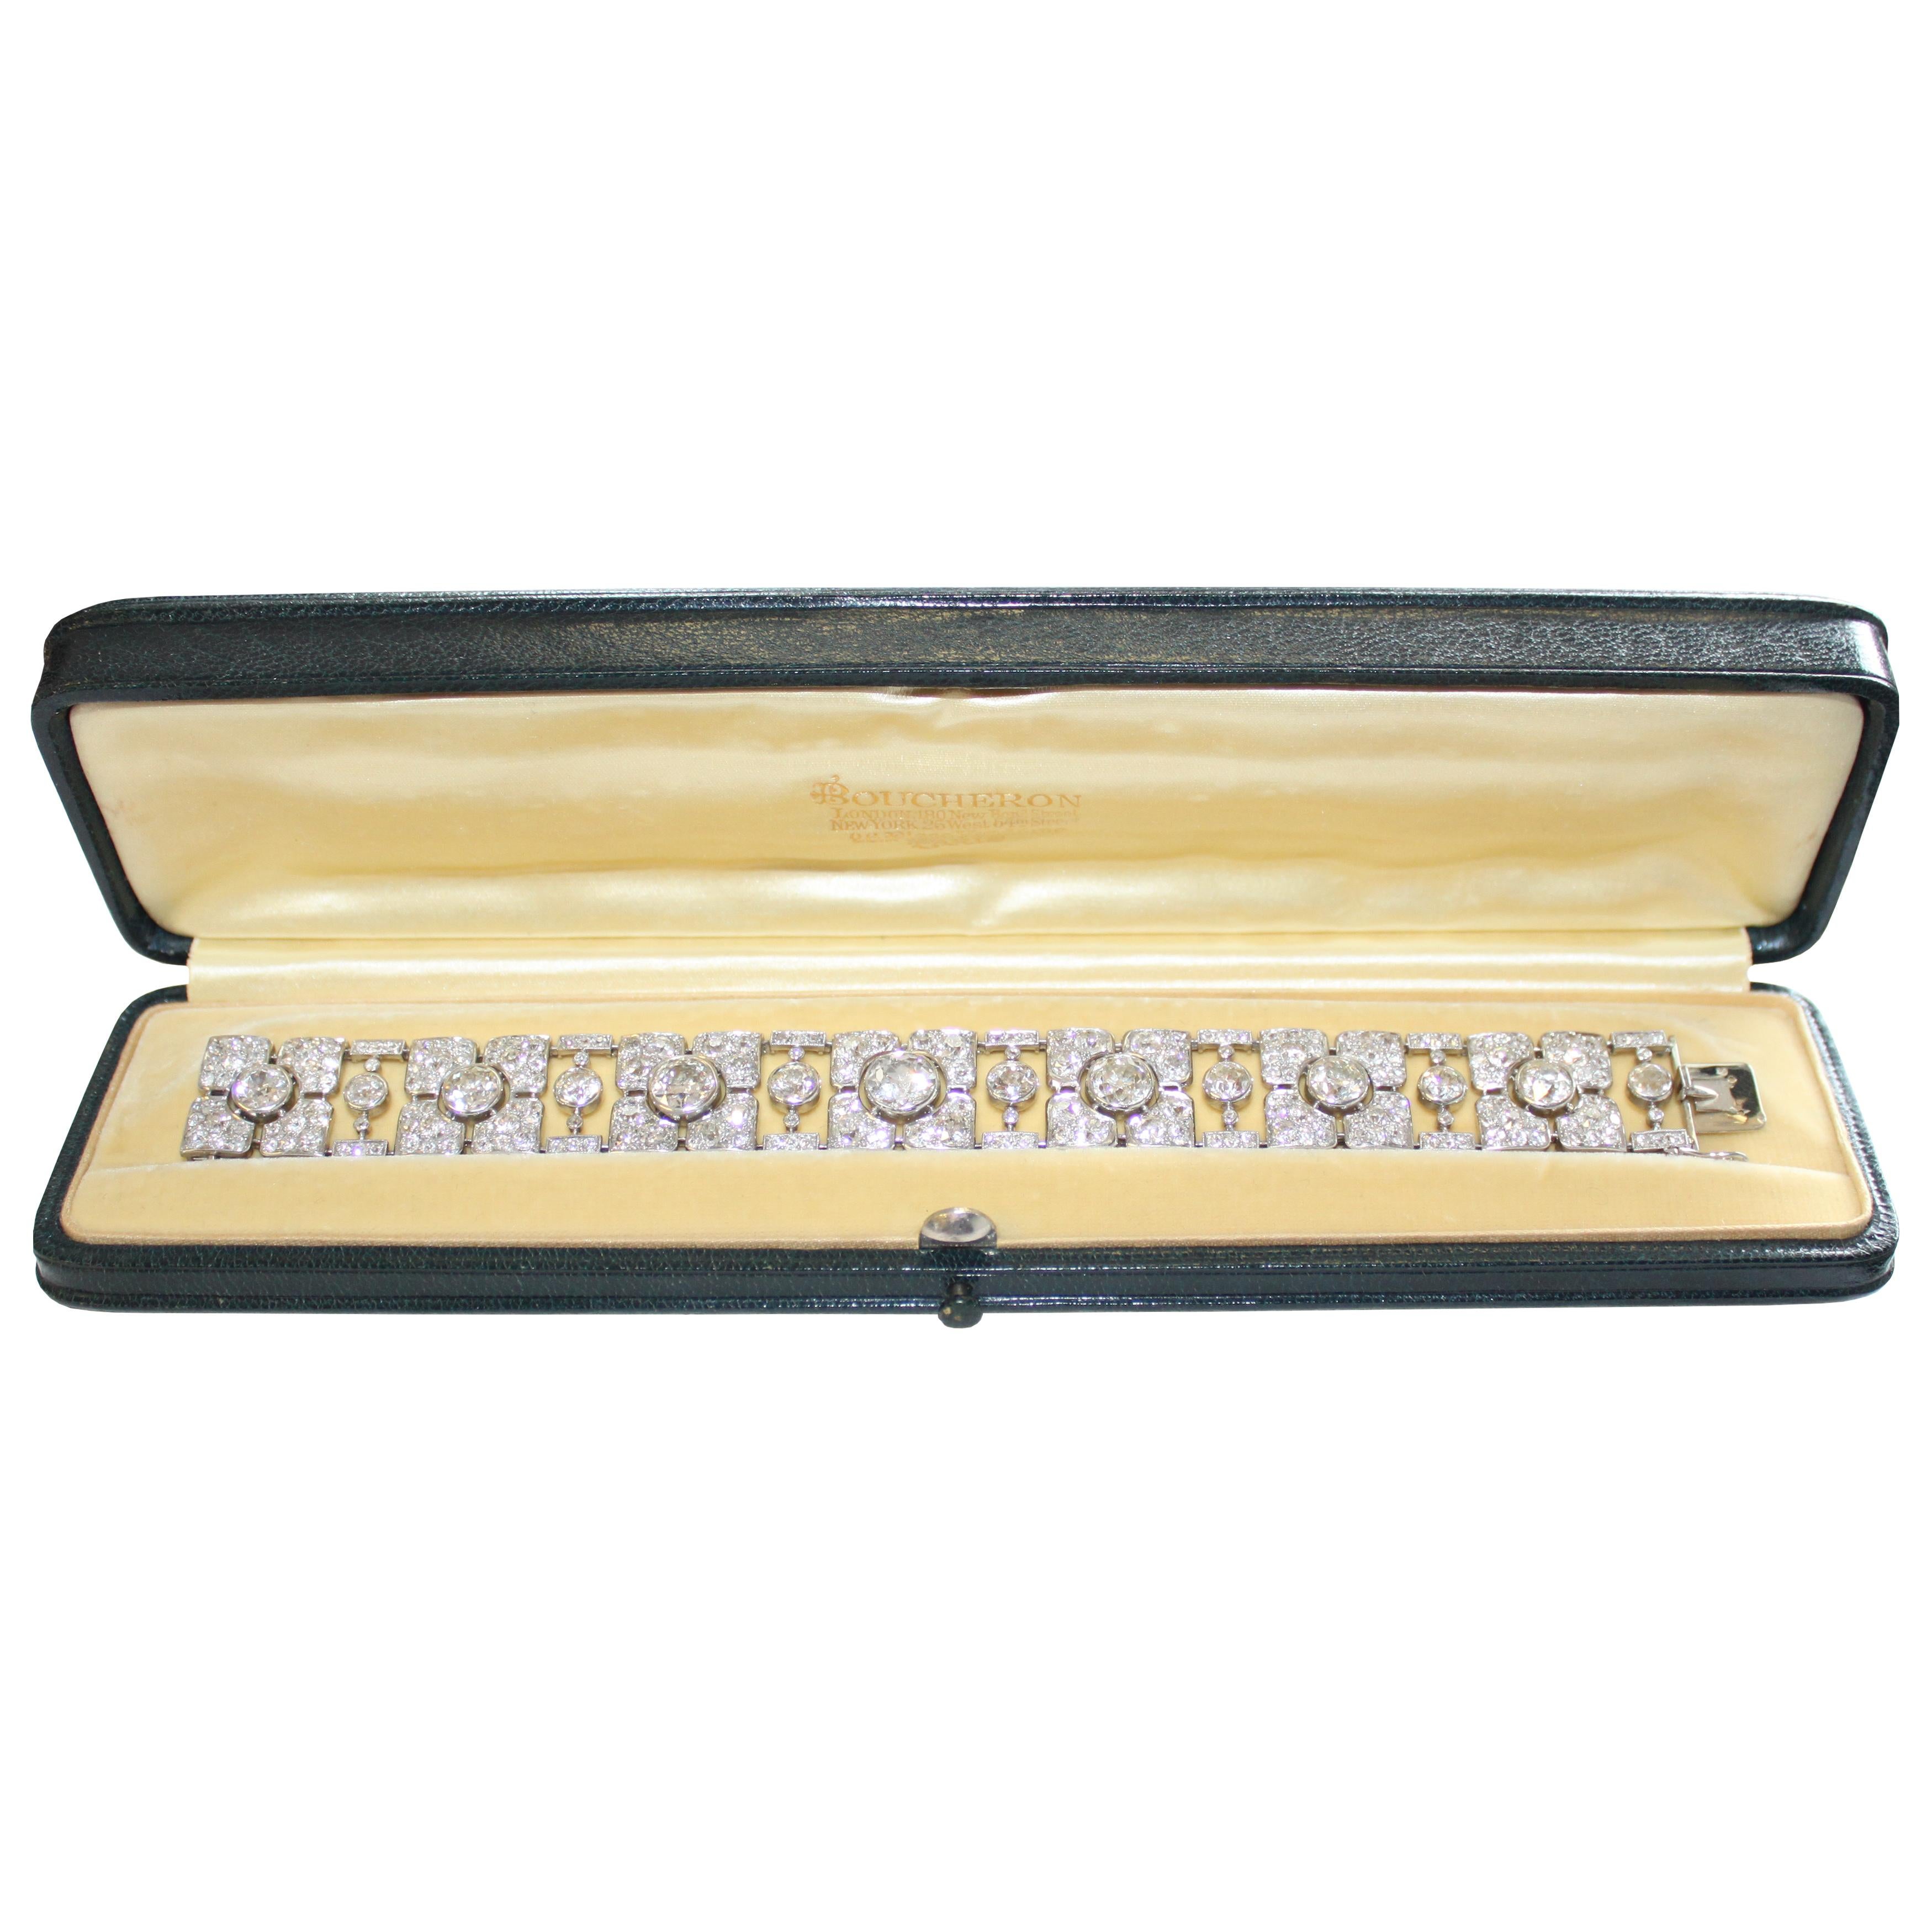 A beautiful and stunning Art Deco diamond bracelet from the renowned French jewellers Boucheron. The bracelet has 14 moveable parts in alternating design each set with a bigger old European cut diamond.
(Seven center diamonds each one is from